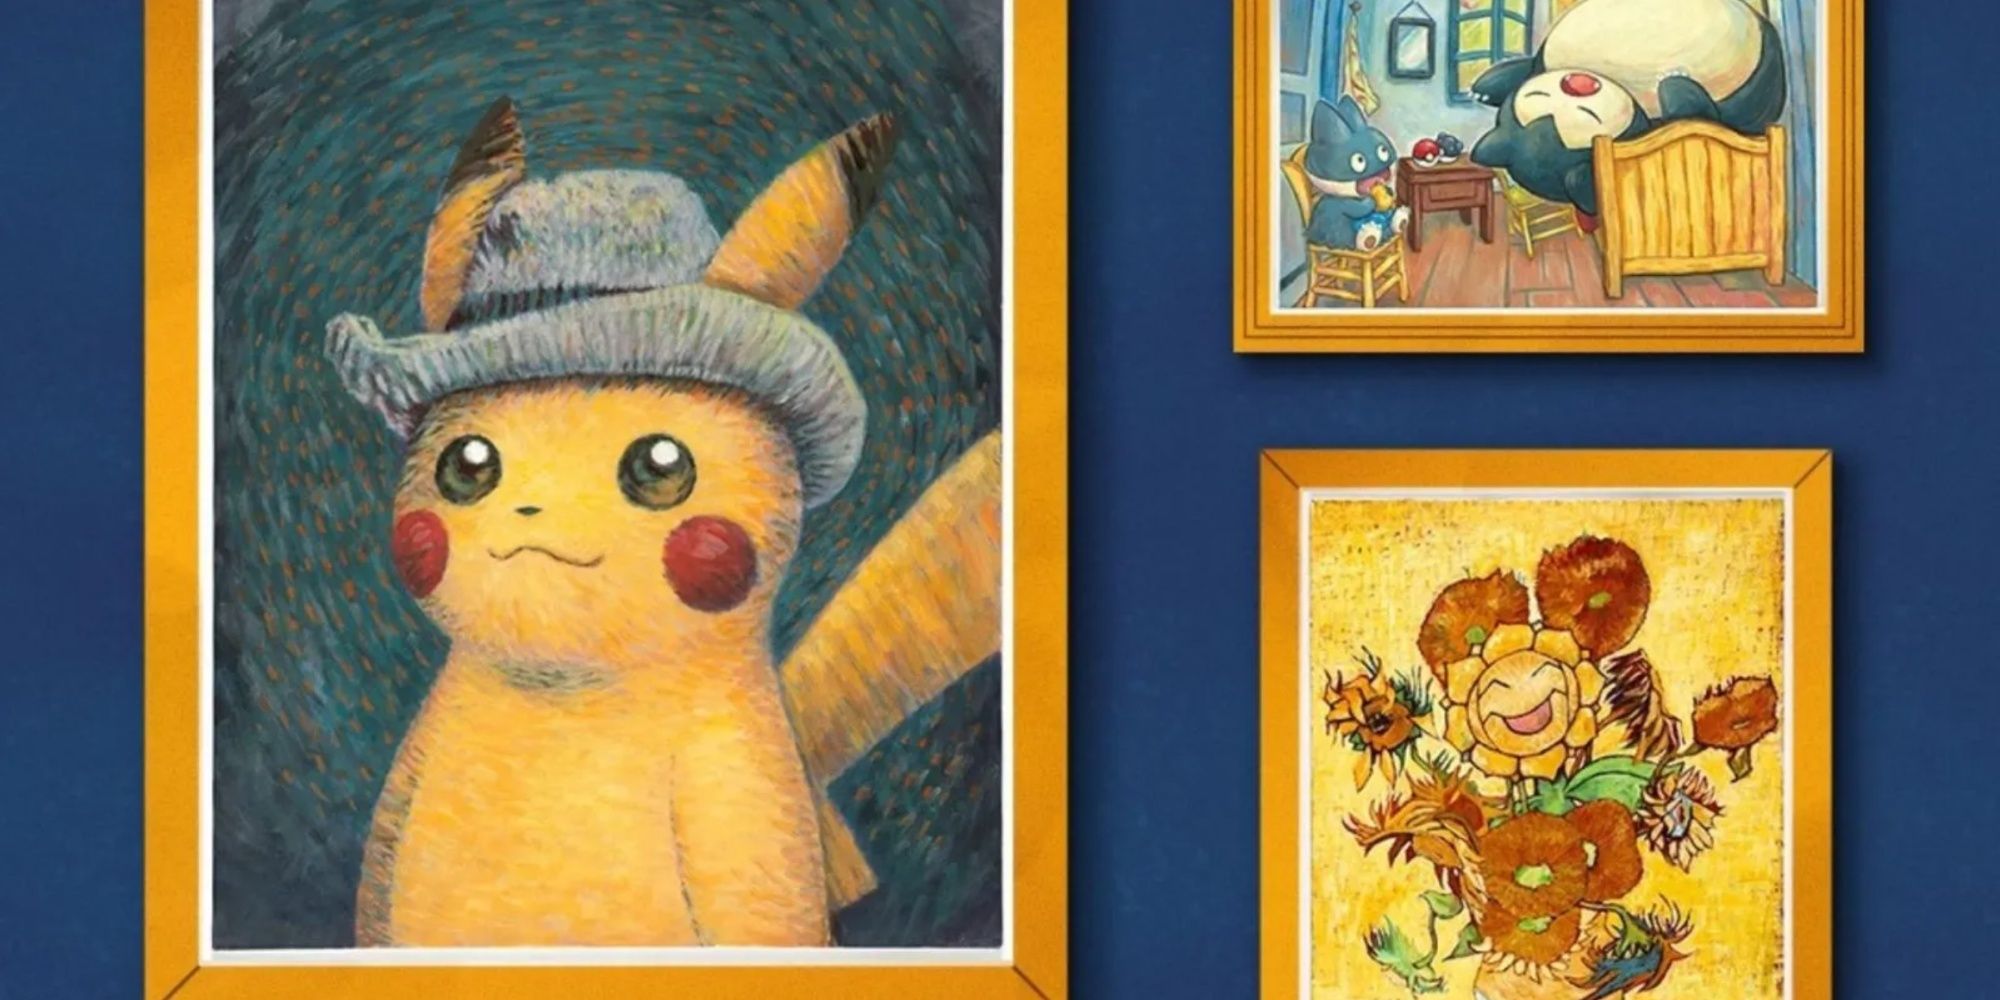 van gogh paintings reimagined to include pokemon